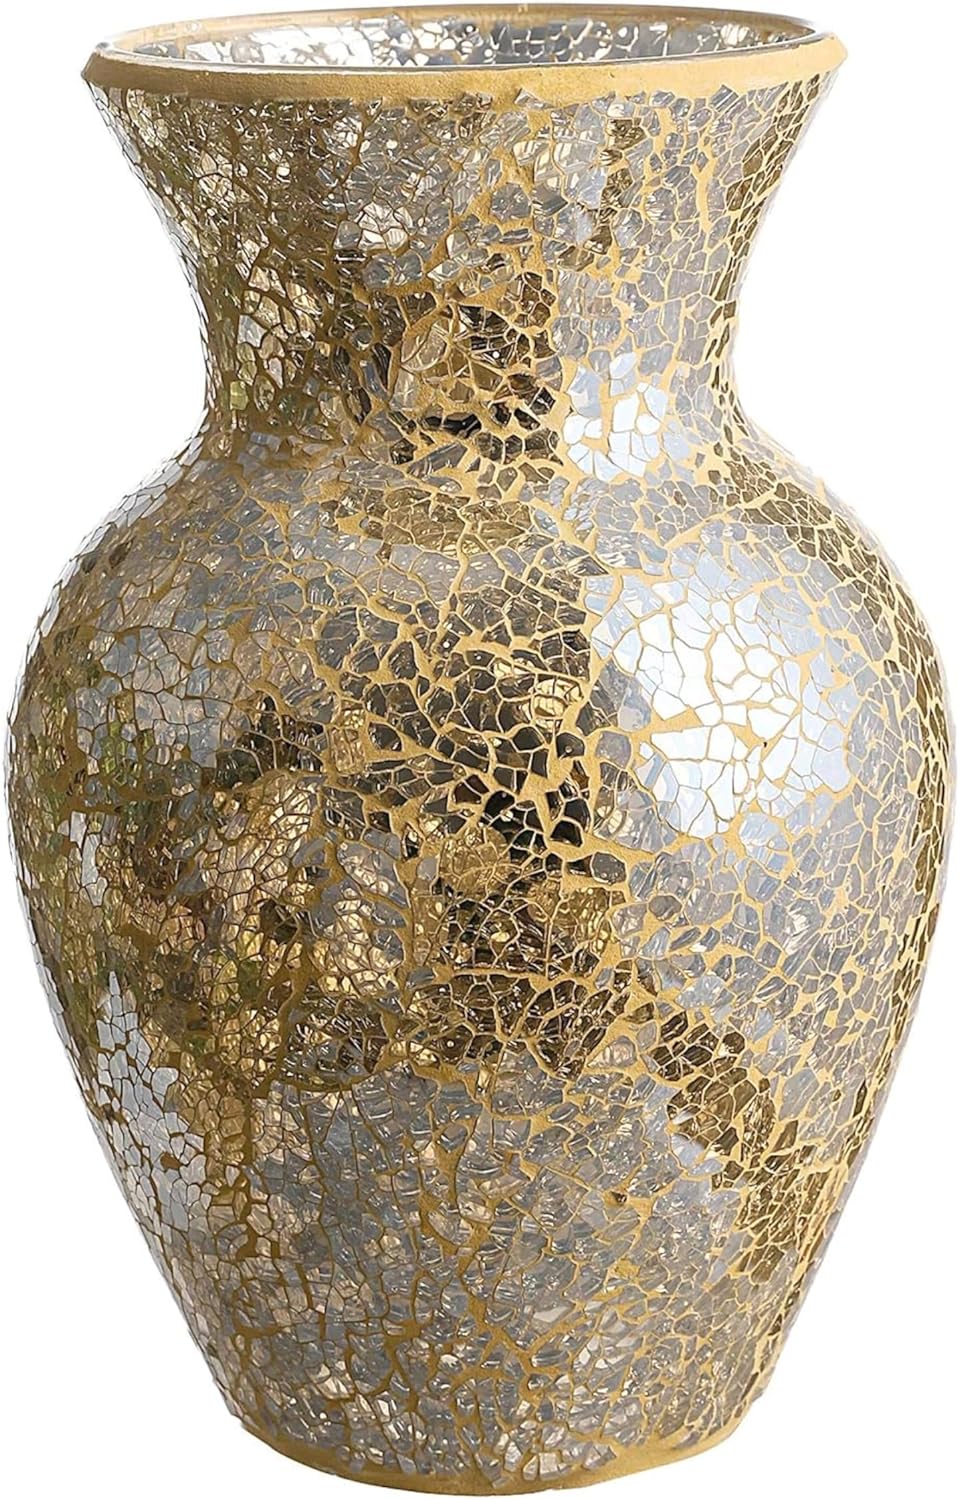 WHOLE HOUSEWARES | Mosaic Glass Vase | 10.5 Home Dcor Centerpiece | Elegant Glass Flower Vase for Living Room, Kitchen, Wedding Banquet, Dried and Artificial Flowers | Home Dcor (Gold)